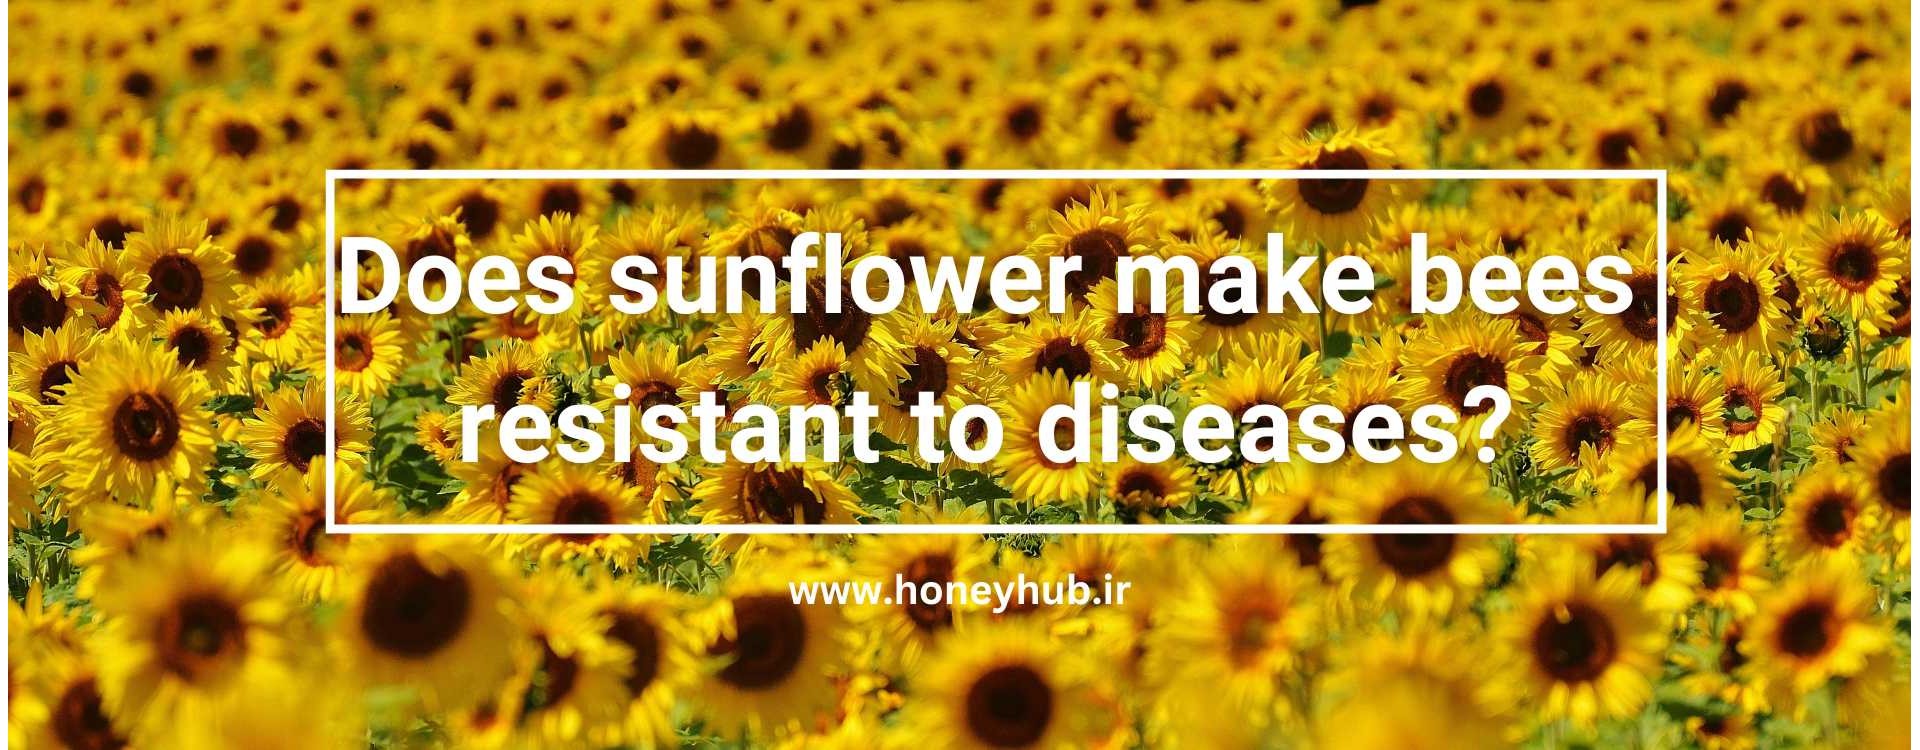 Does sunflower make bees resistant to diseases?